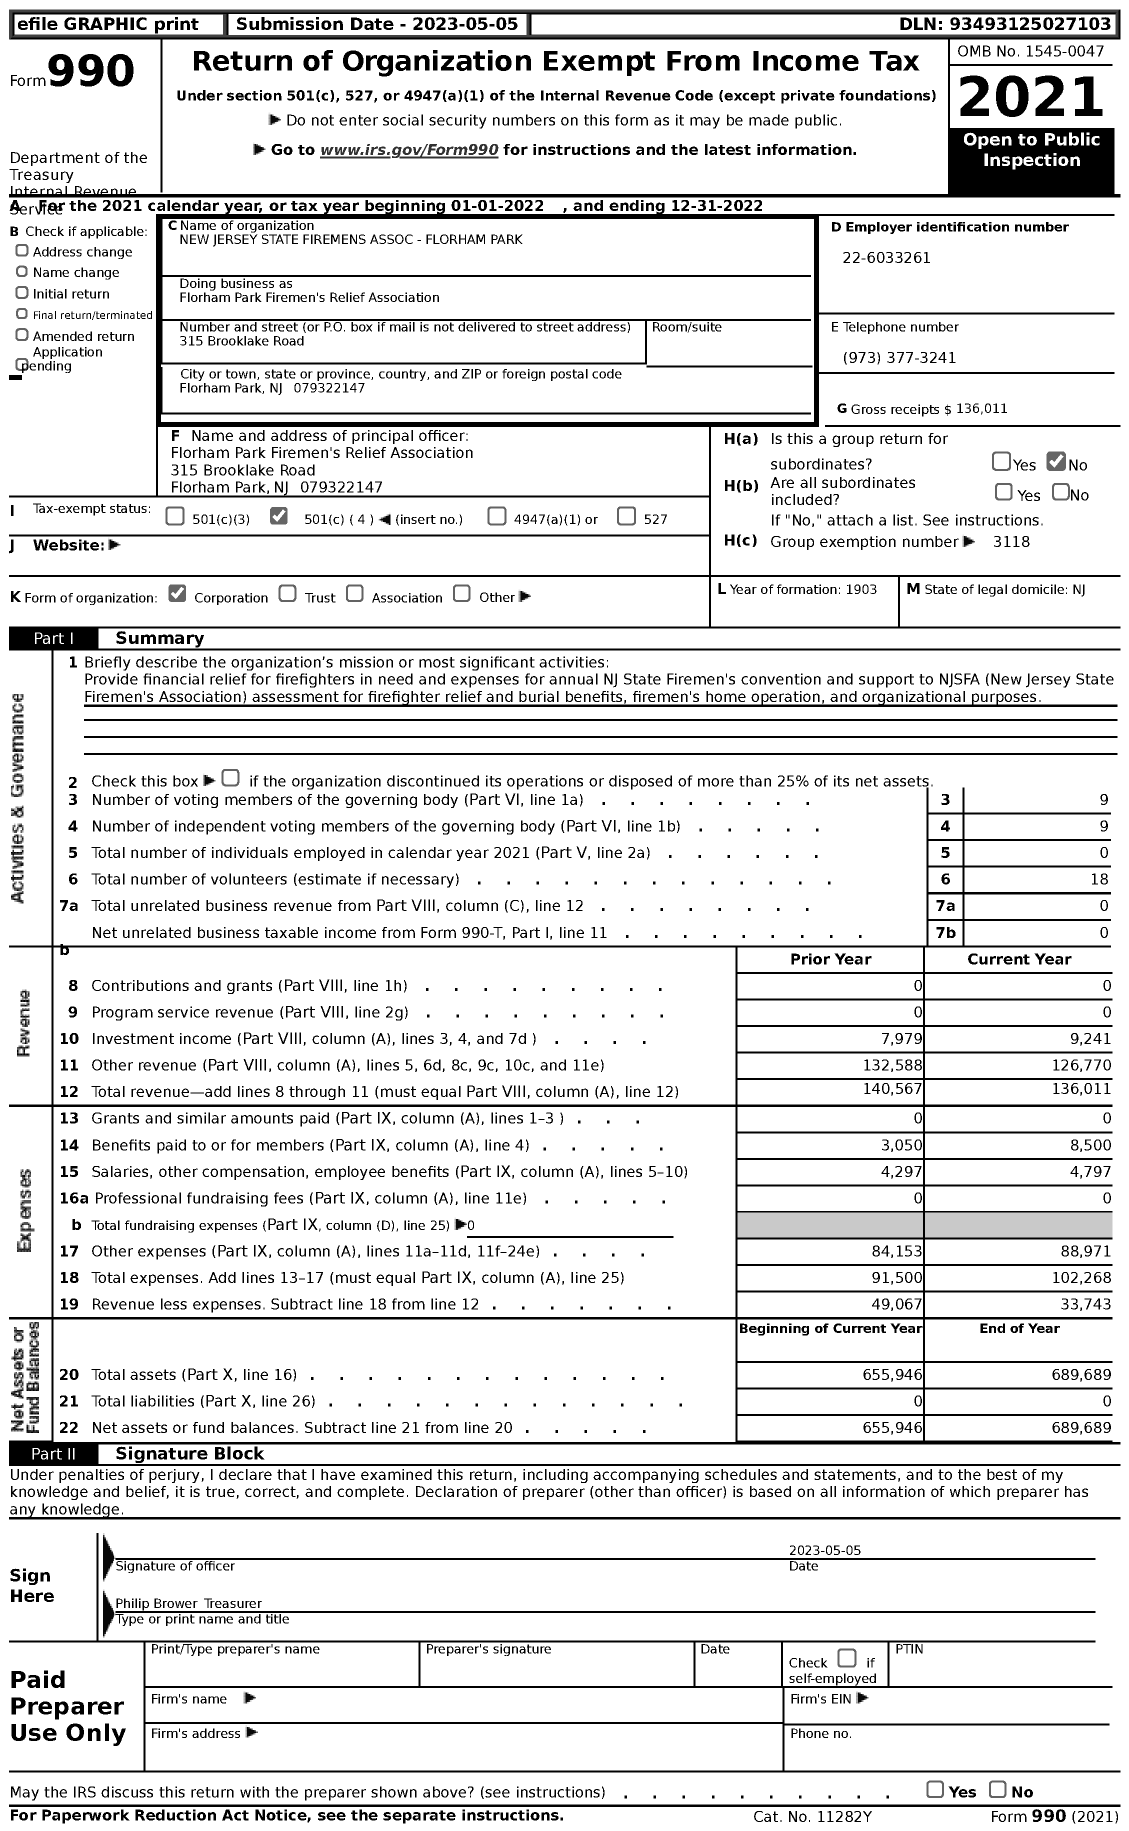 Image of first page of 2022 Form 990 for New Jersey State Firemen's Association - Florham Park Firemen's Relief Association